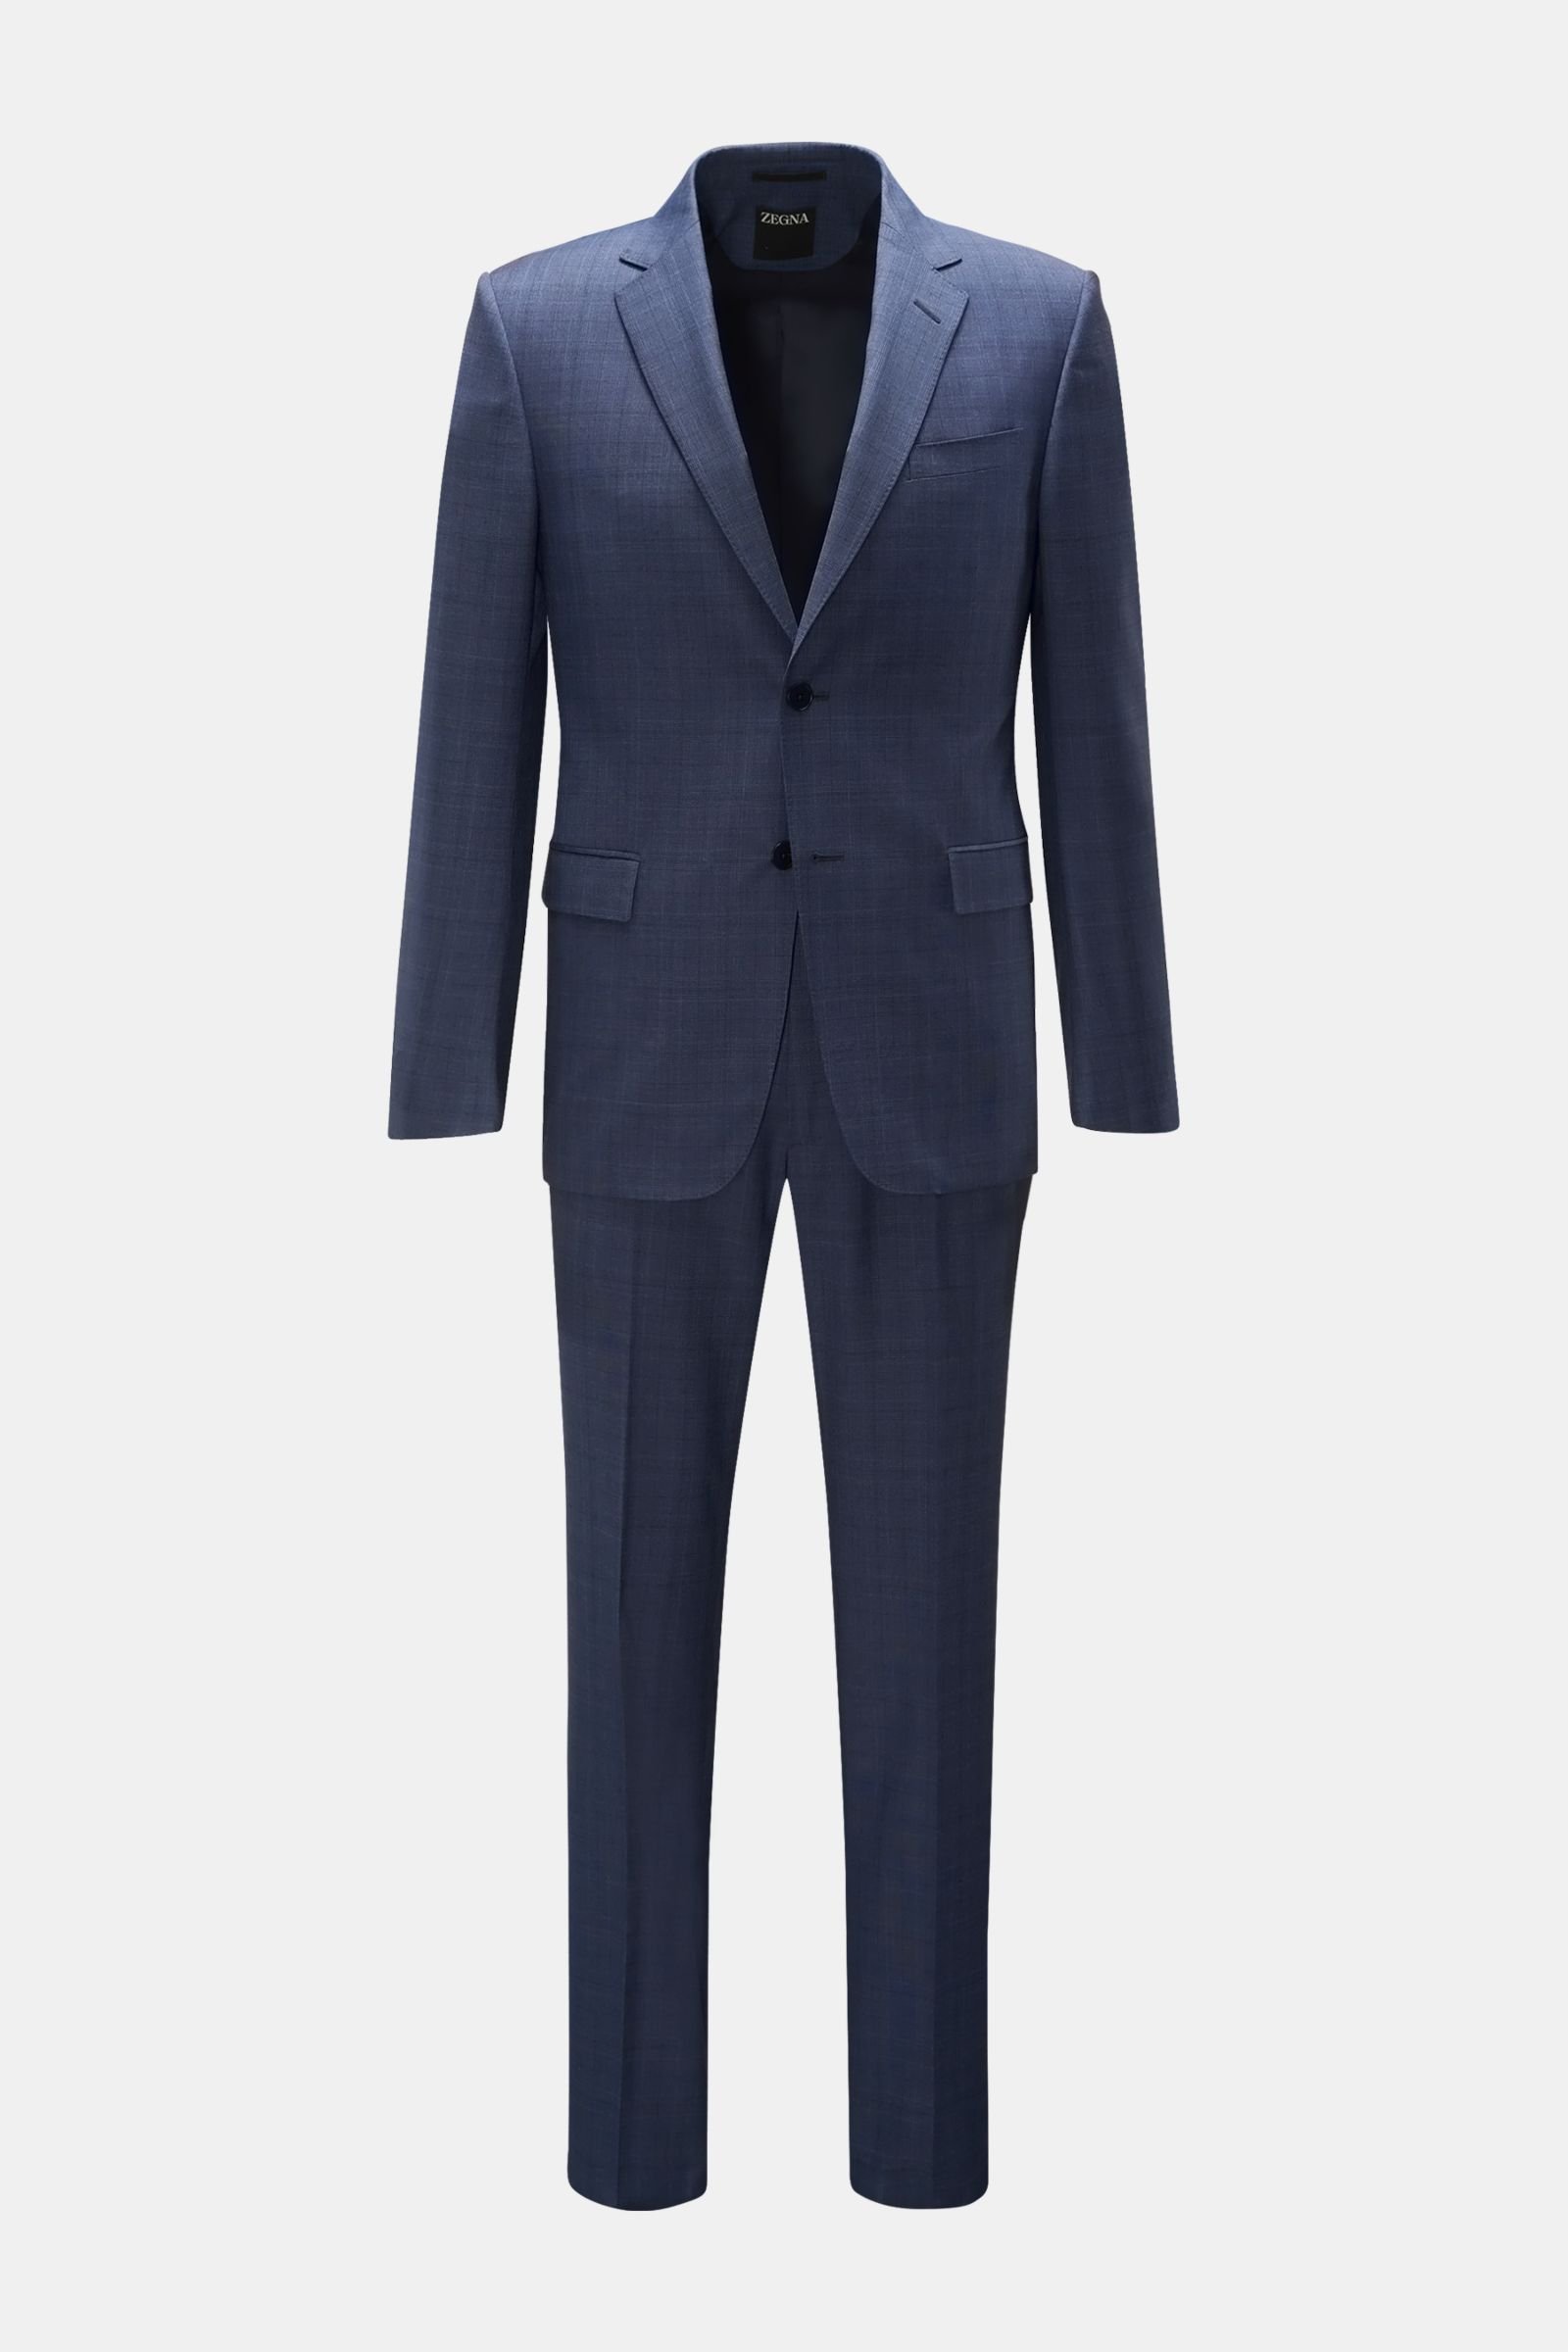 Suit grey-blue checked